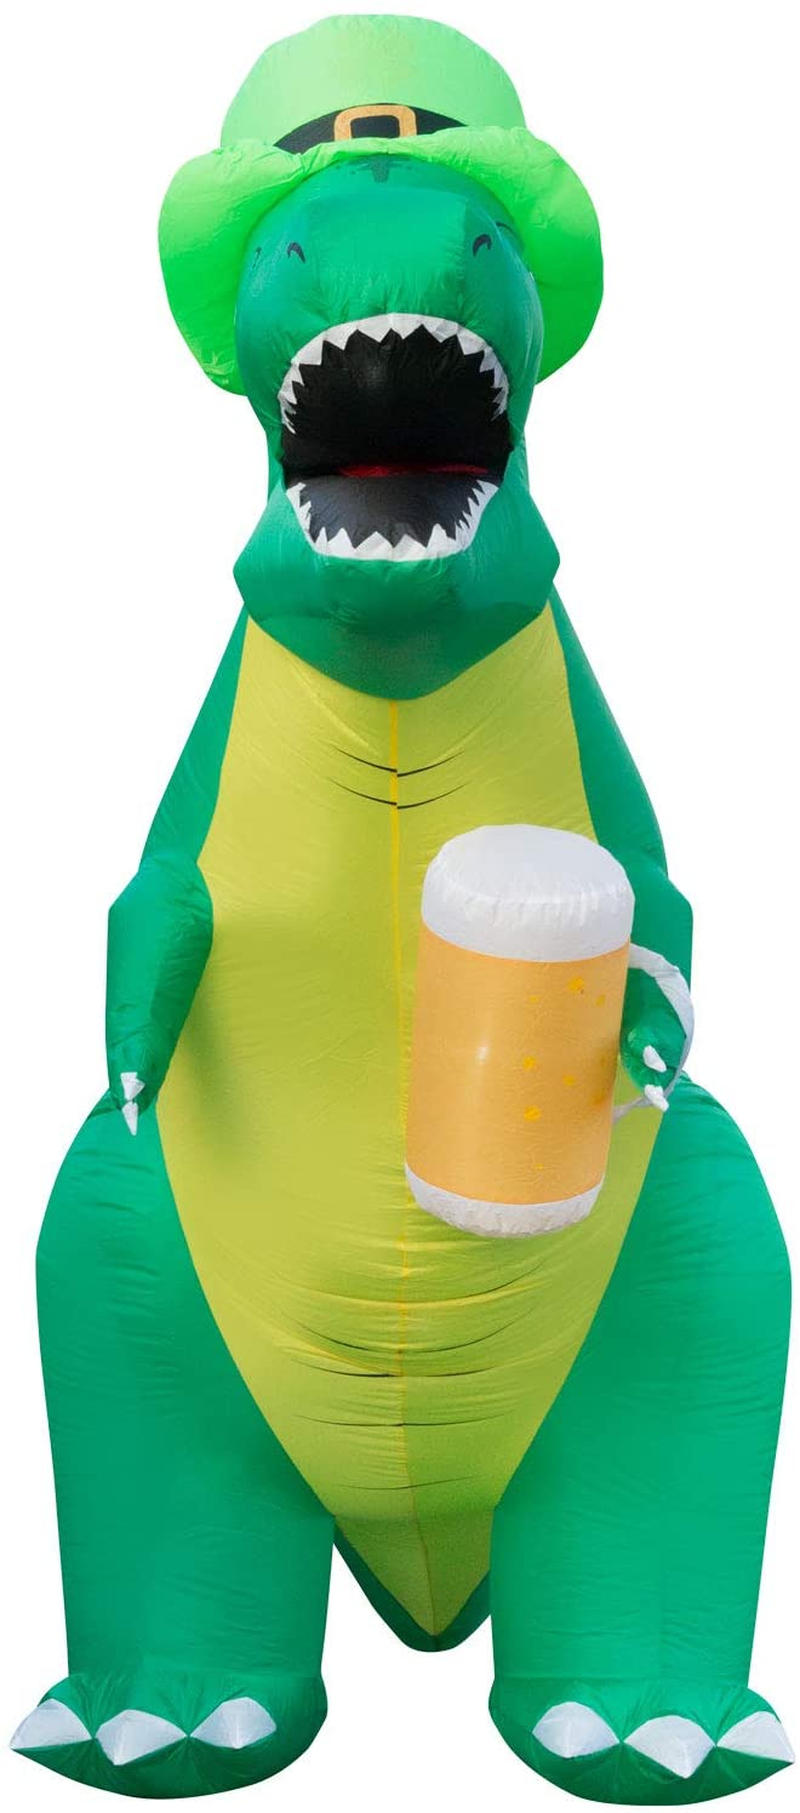 Holidayana 8Ft St Patricks Day Inflatable Trex - Dinosaur in Leprechaun Hat Holding Beer Mug Blow up Yard Decoration, Includes Built-In Bulbs, Tie-Down Points, and Powerful Built-In Fan